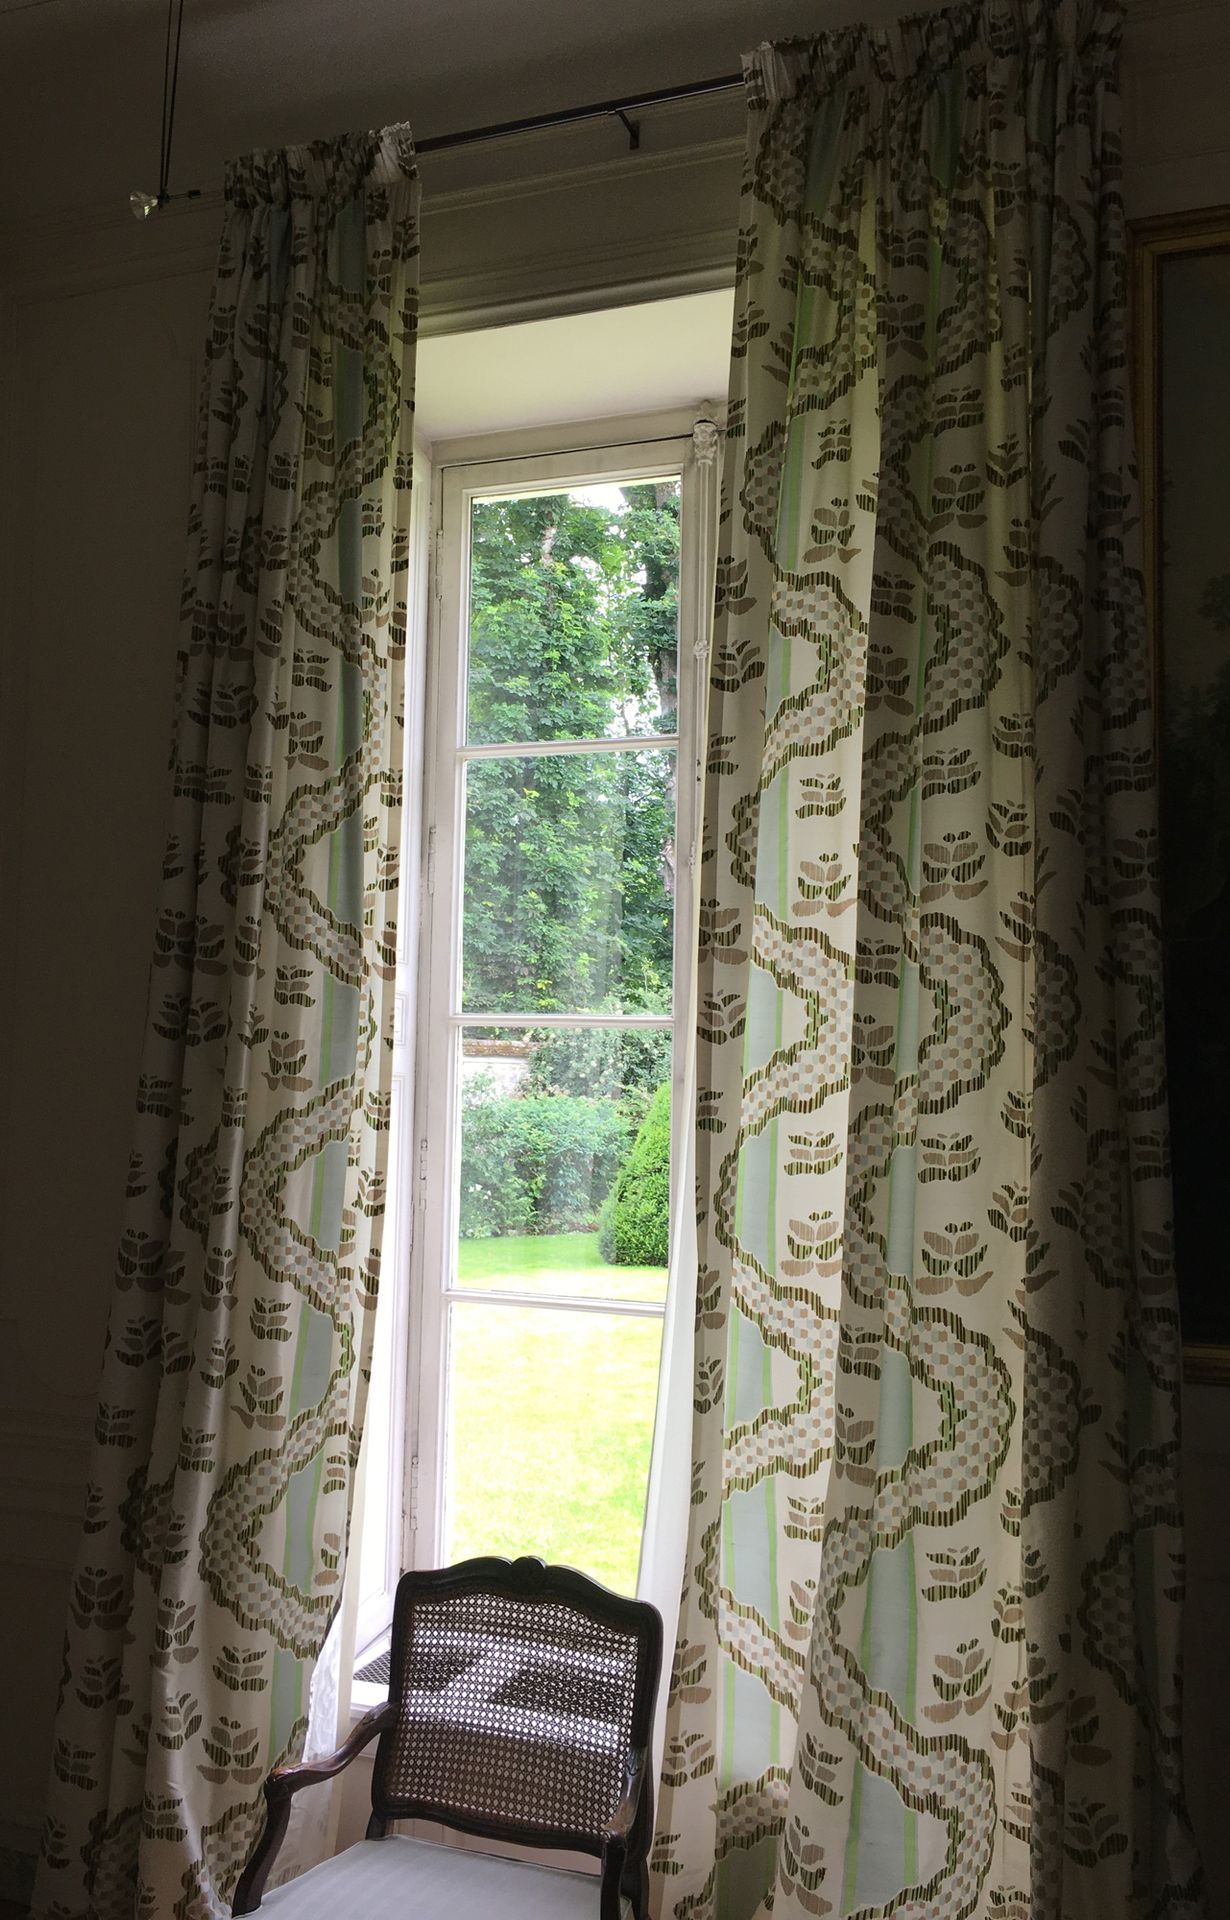 Null THORP OF LONDON Two pairs of lined silk curtains. About 400 x 240 cm